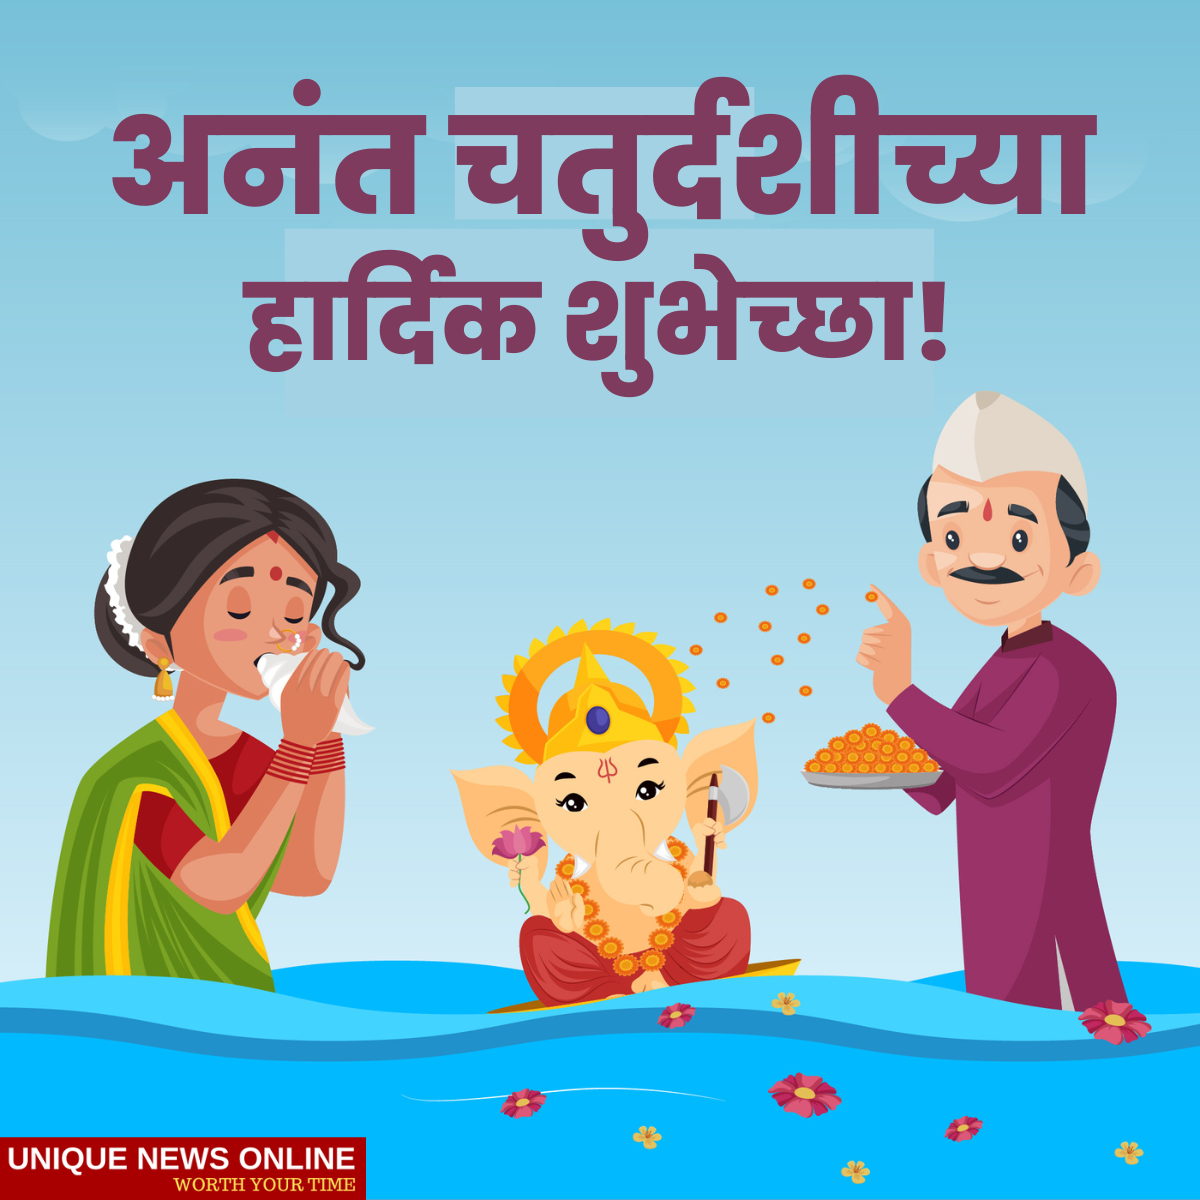 Happy Anant Chaturdashi 2022: Best Marathi Shayari, Quotes, Greetings, Wishes, Images, and Messages to share